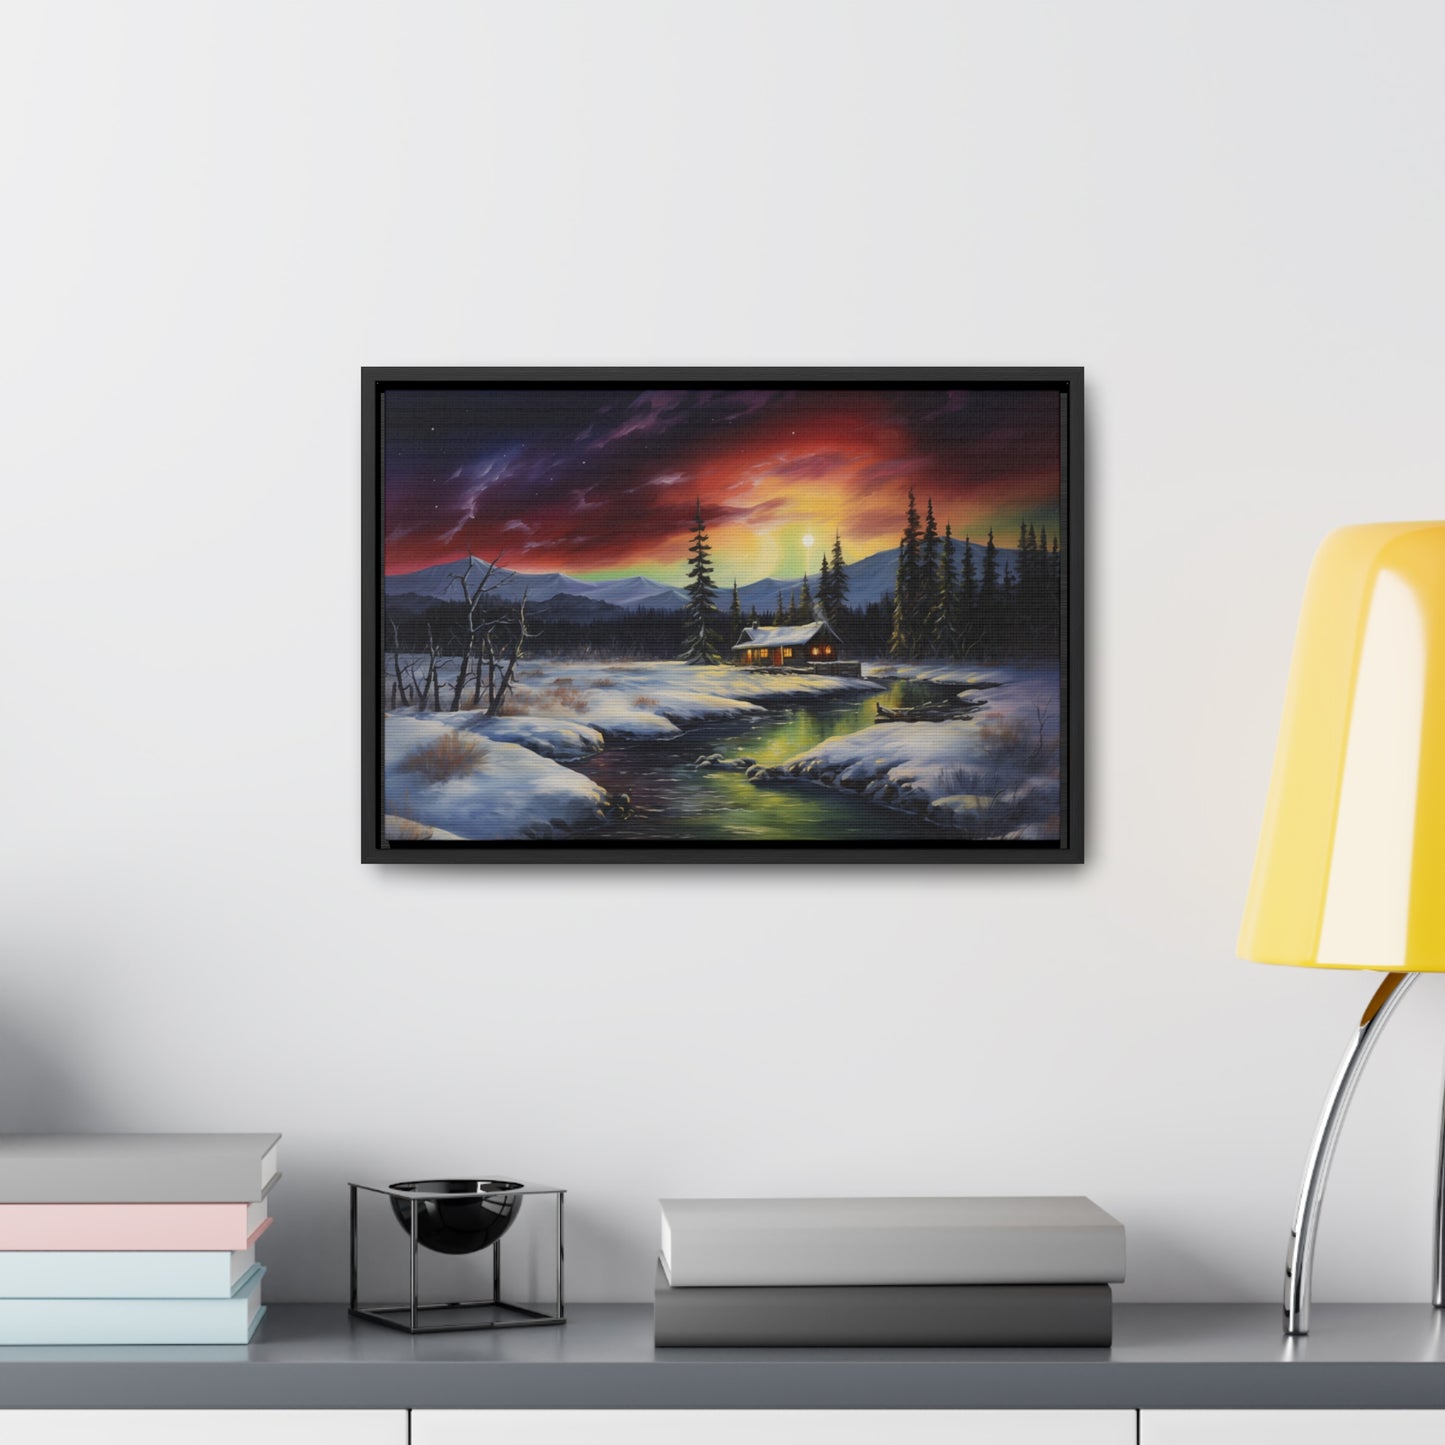 Cabin in the Woods - Northern Lights - Gallery Canvas Wrap, Horizontal Frame